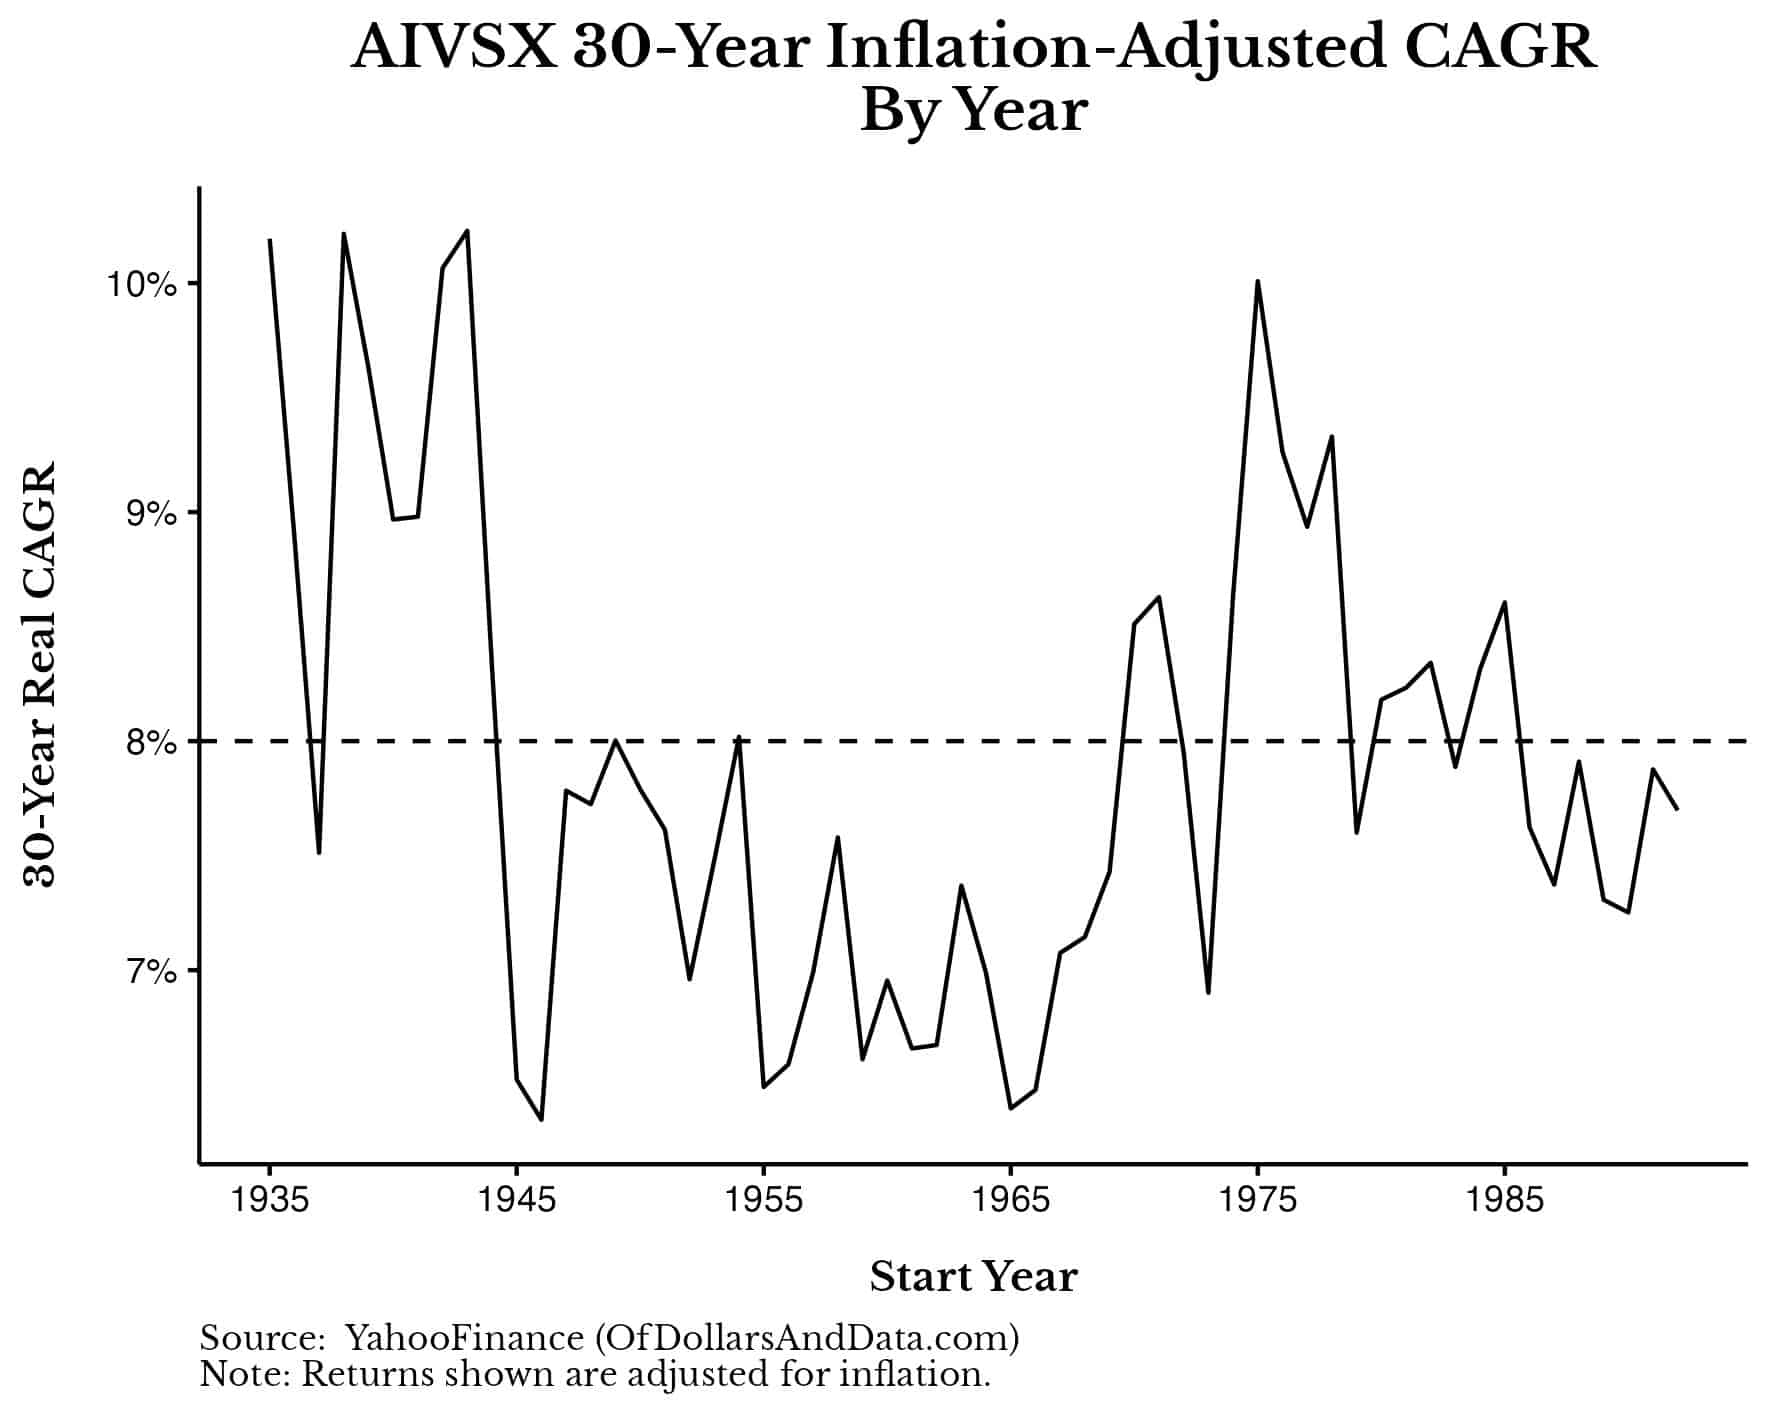 Forward returns of AIVSX over 30 years by start year.